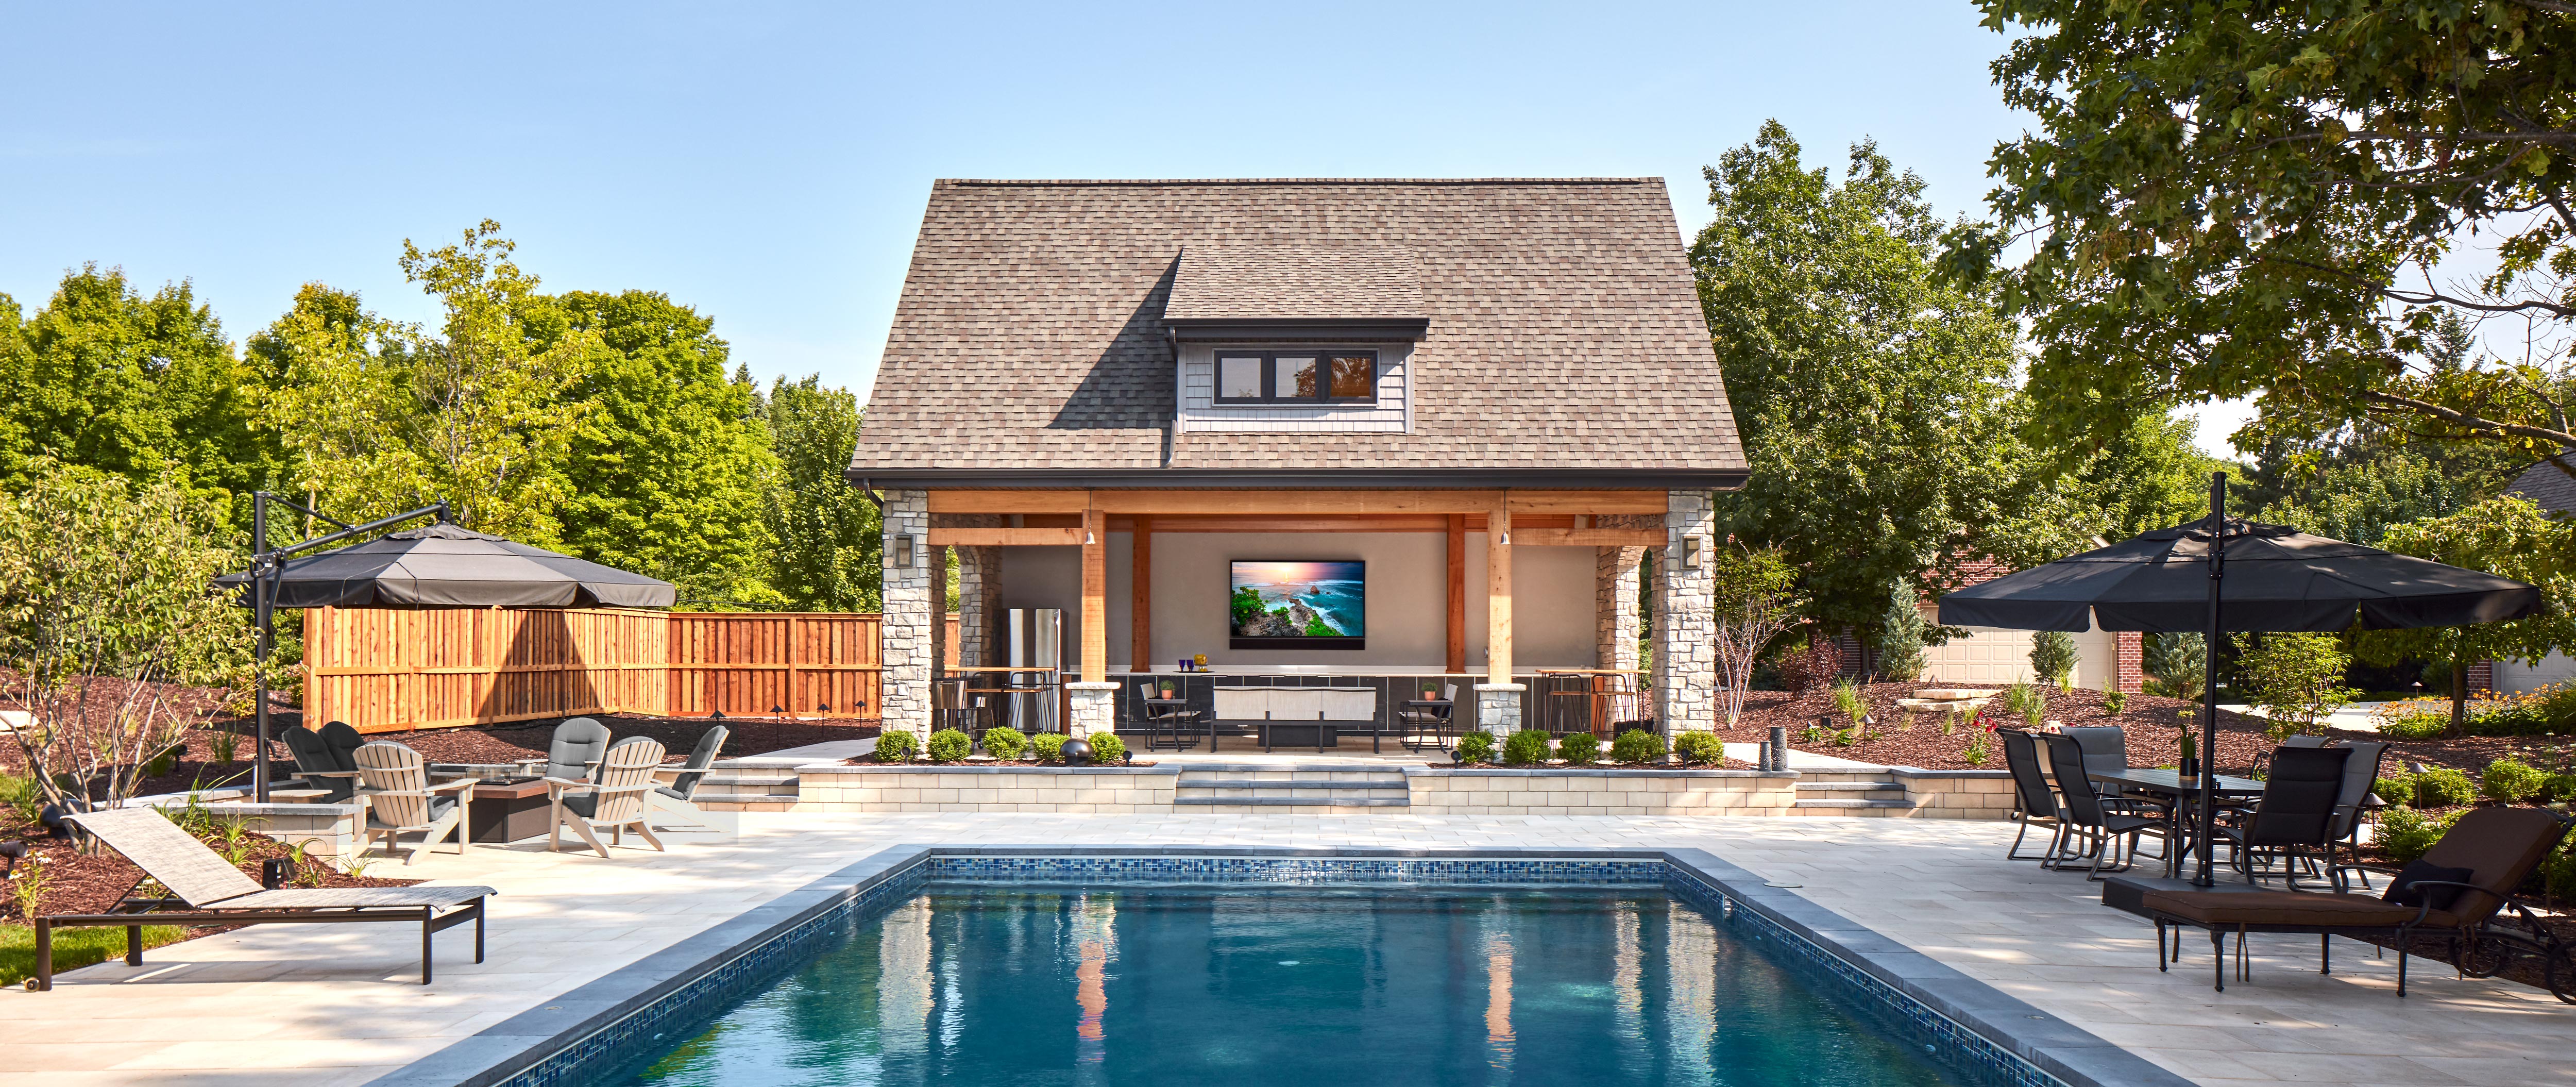 Designing The Perfect Outdoor Entertainment Space - Modern Home Systems